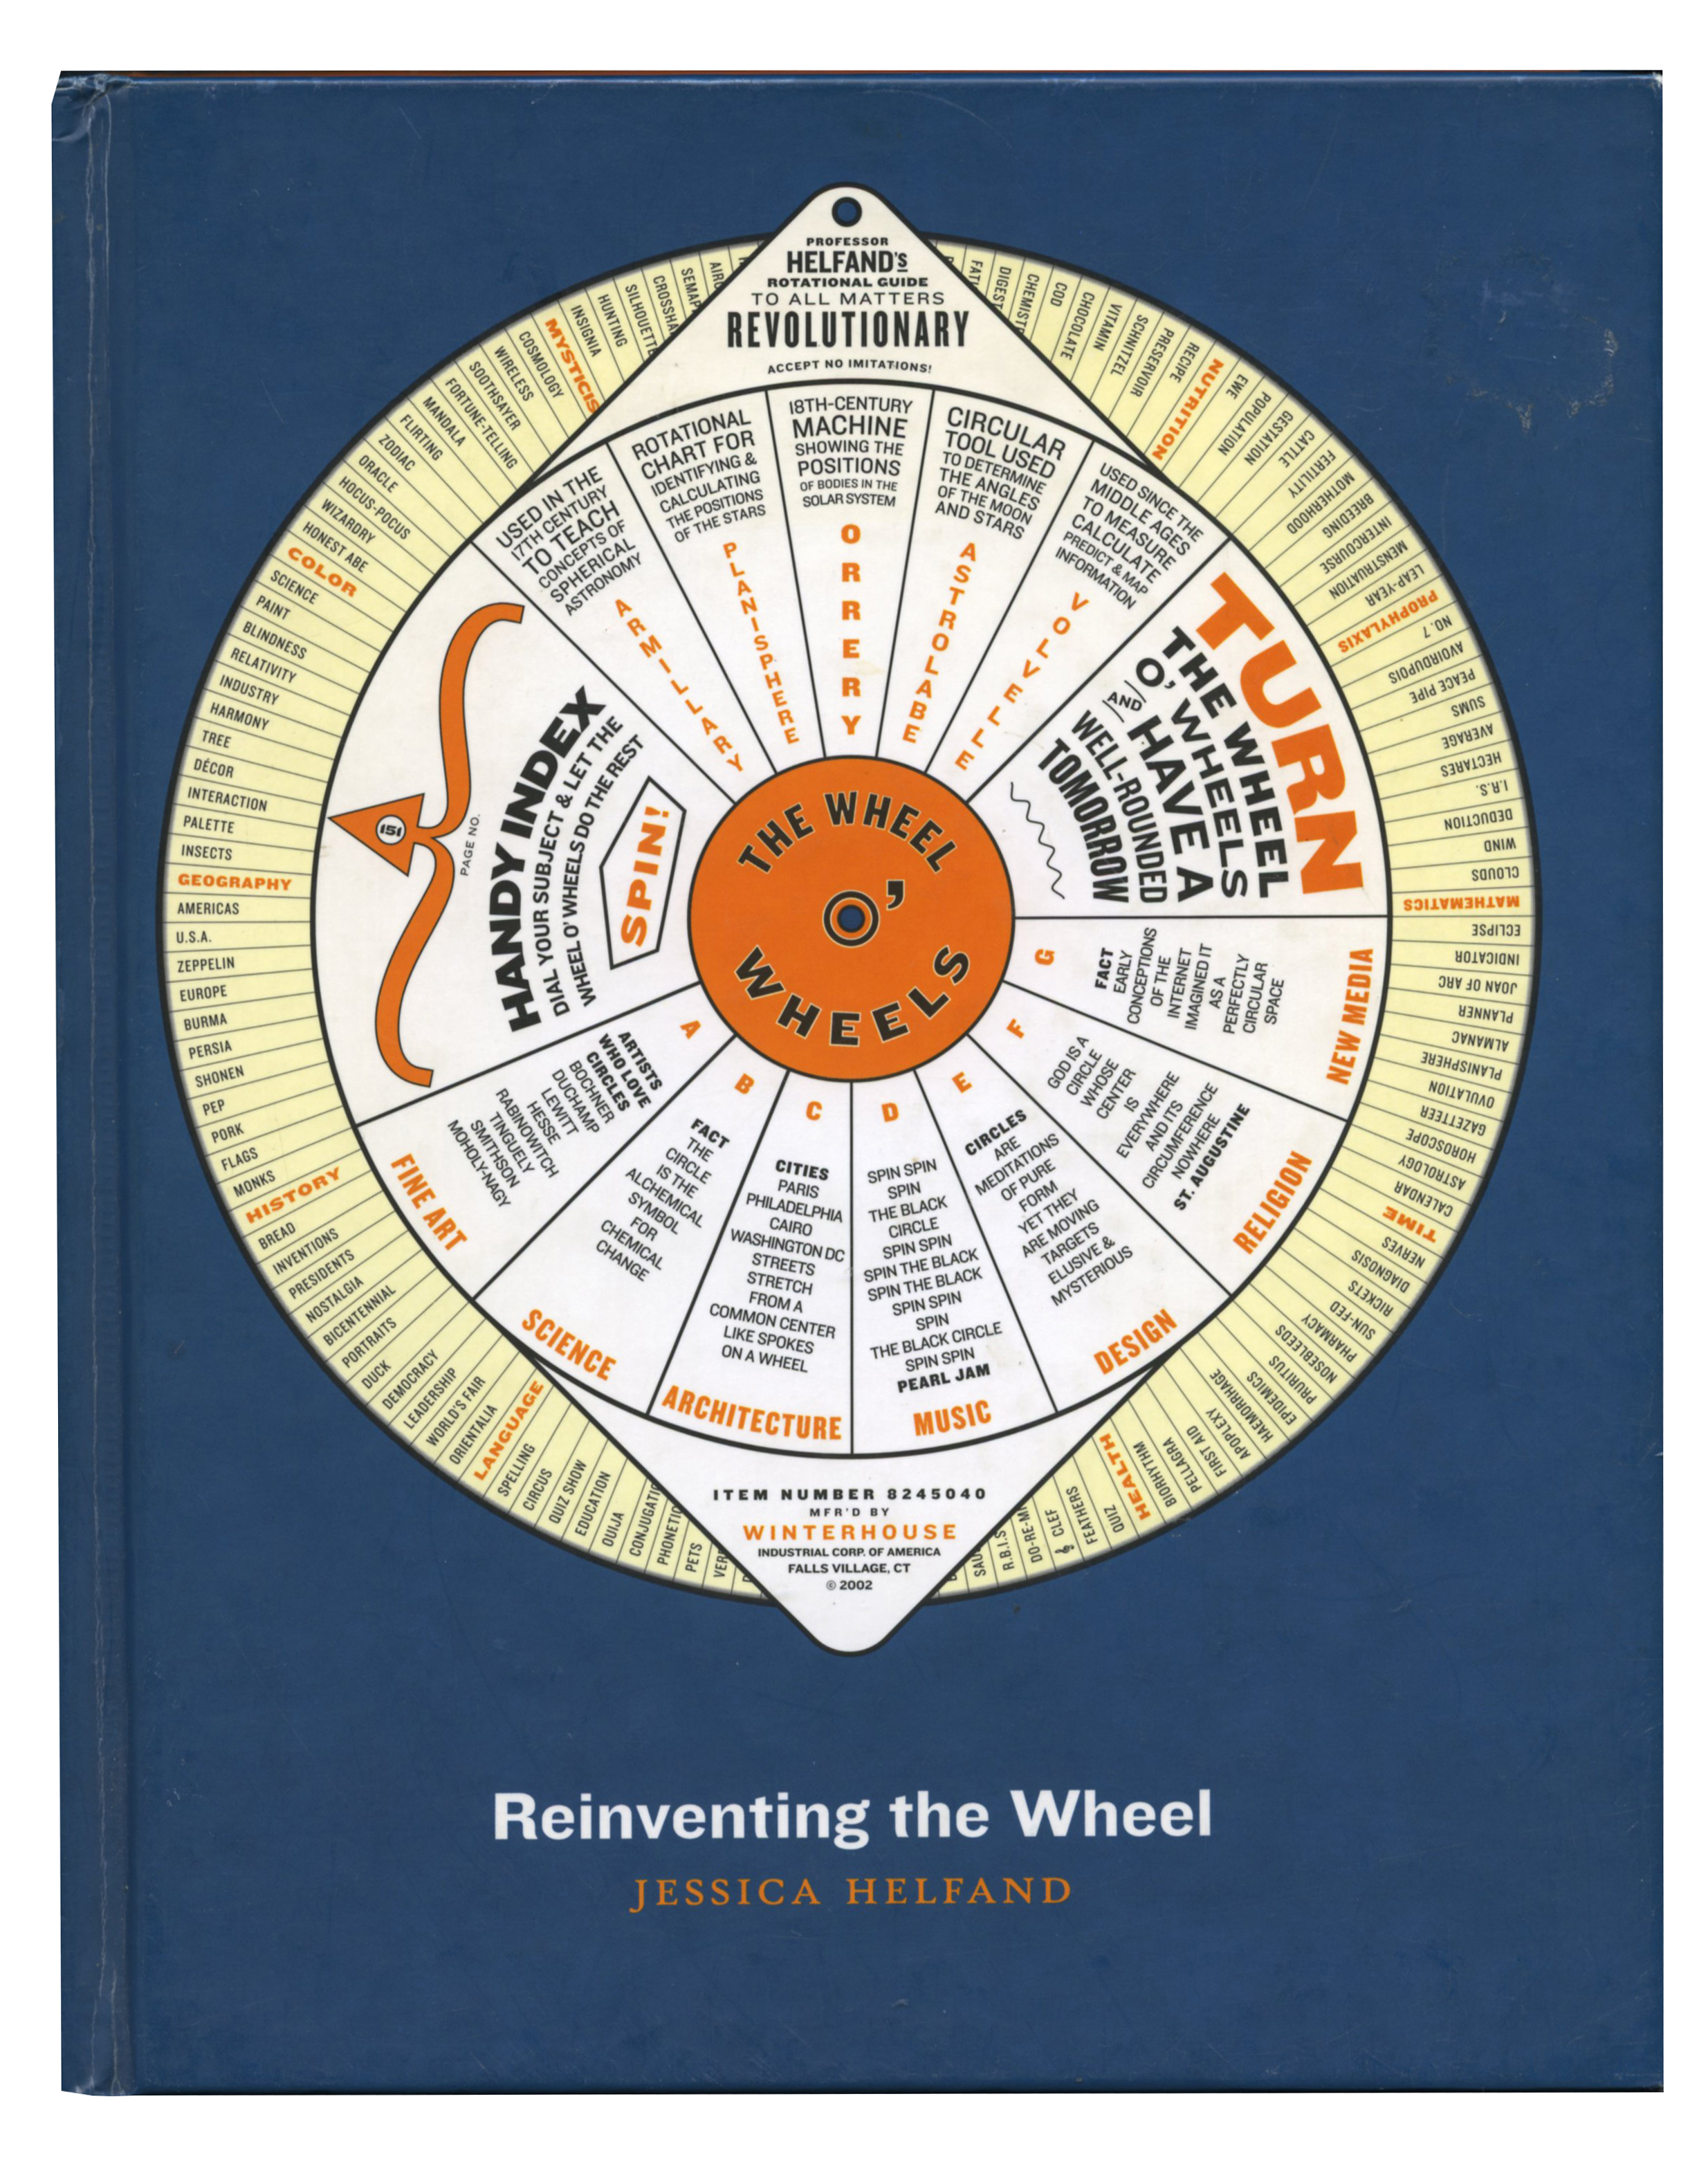 Reinventing the Wheel Book Cover by Jessica Helfand